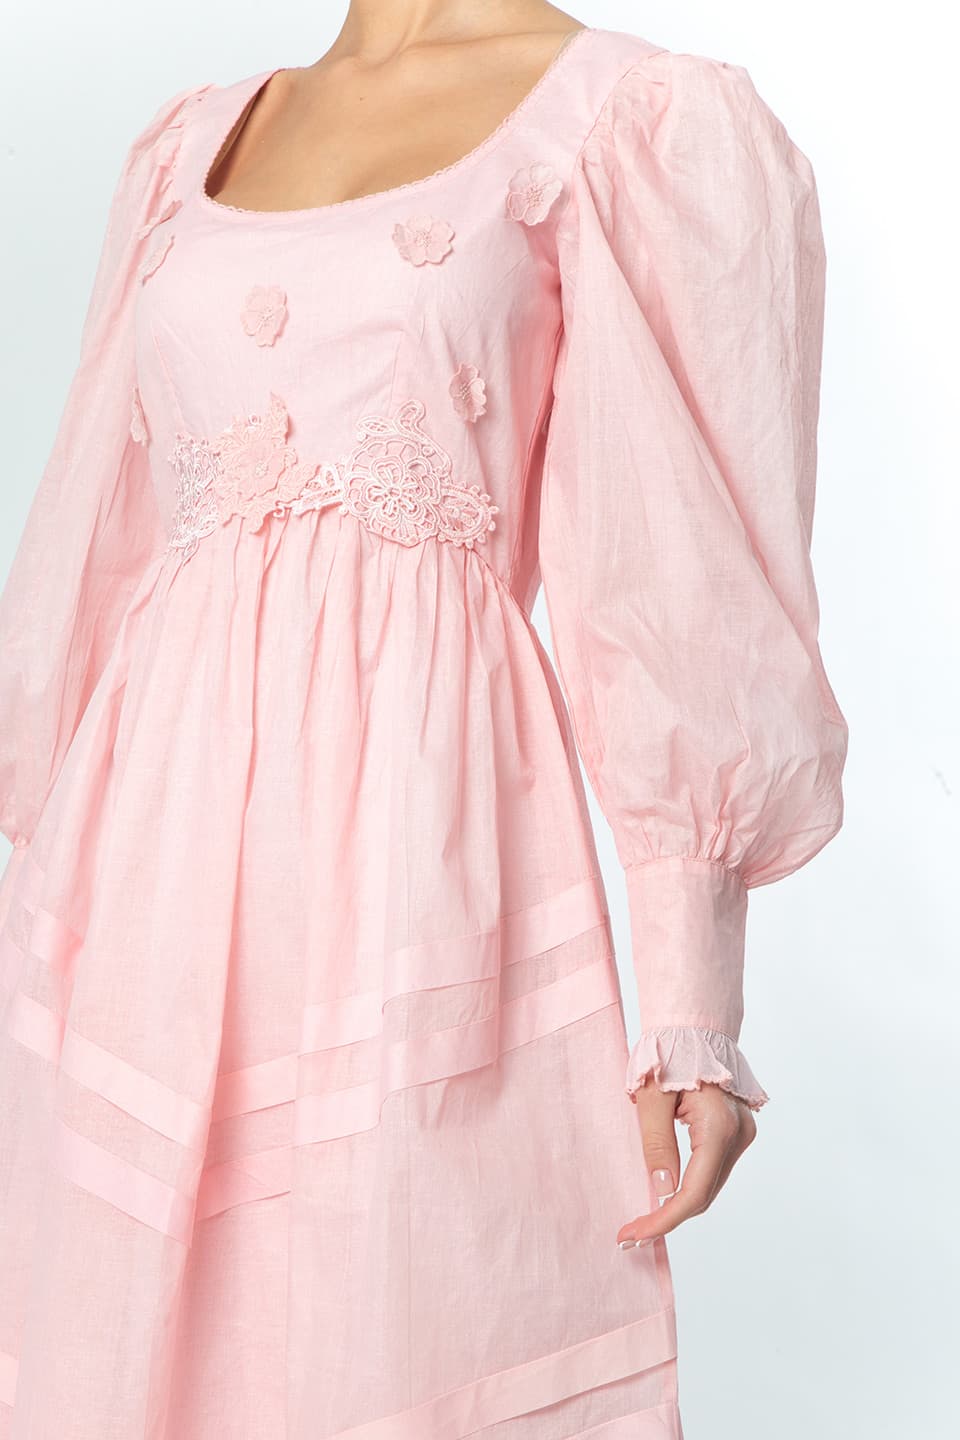 Thumbnail for Product gallery 5, Manoush religeuse long dress pink side detail